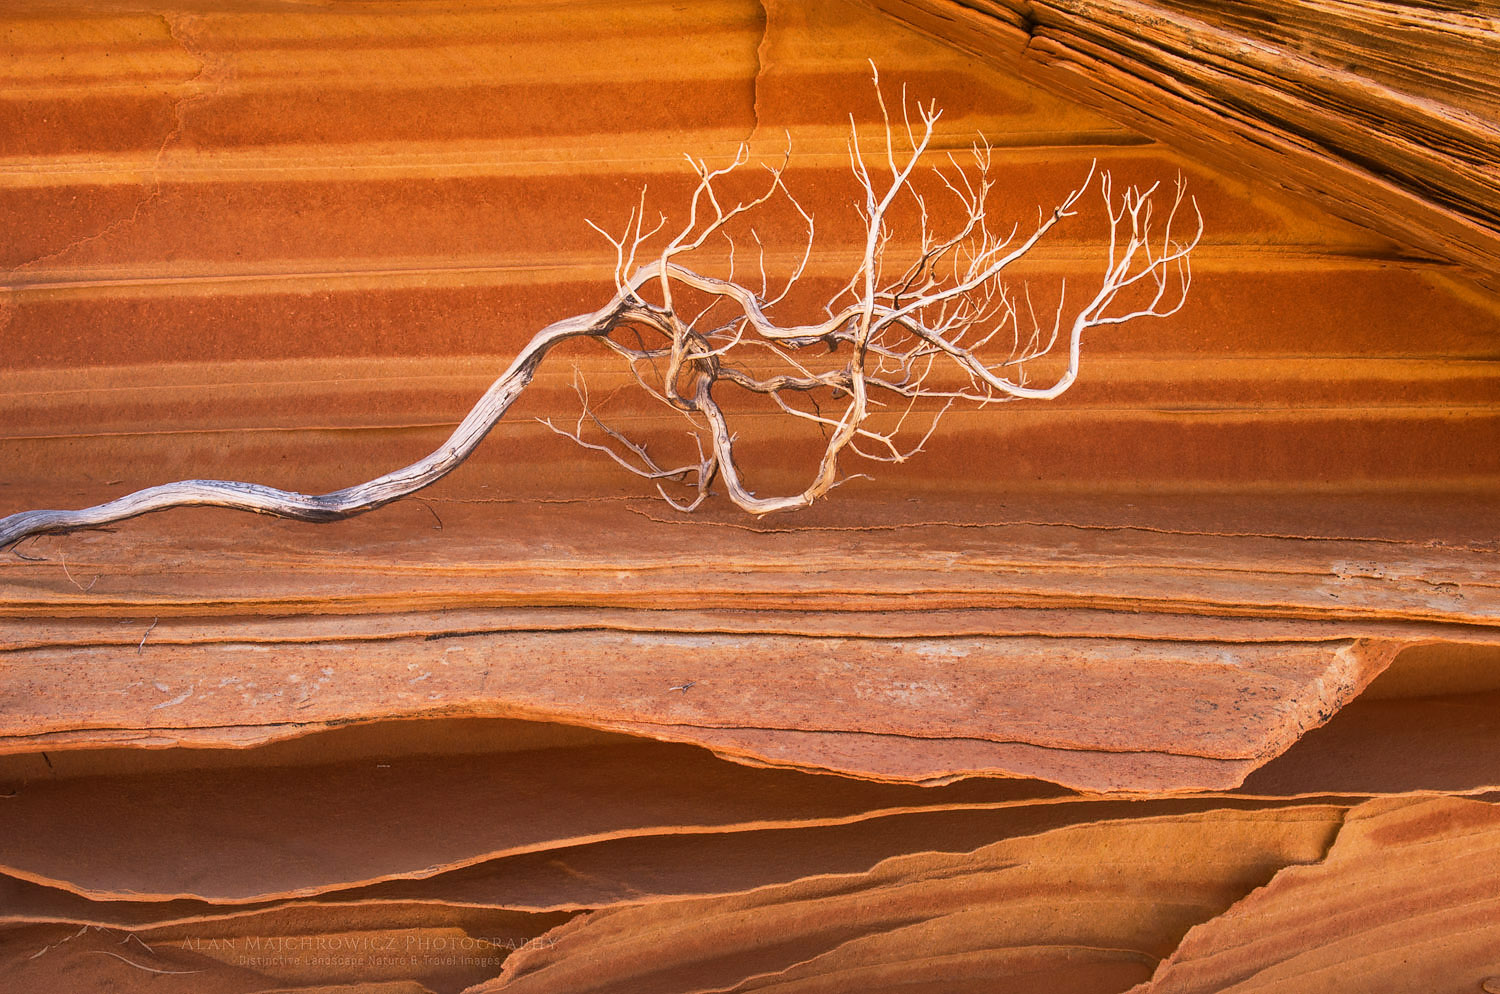 Bleached branch against patterns in layered sandstone, South Coyote Buttes, Vermilion Cliffs Wilderness Utah #37630